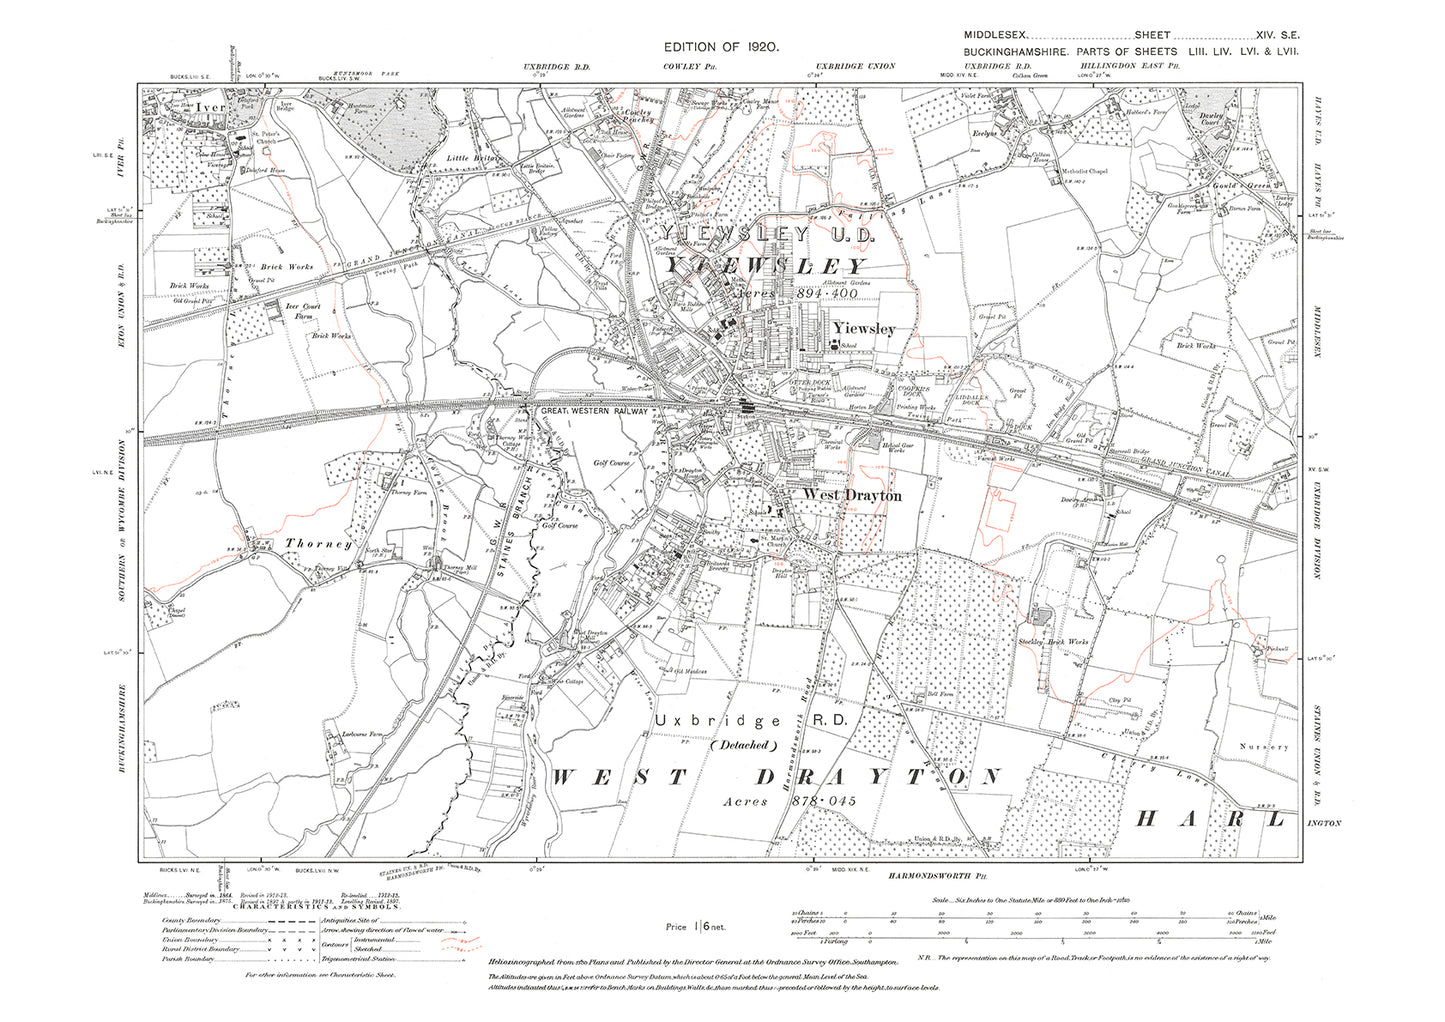 West Drayton, Yiewsley, Thorney, Middlesex in 1920 : 14SE